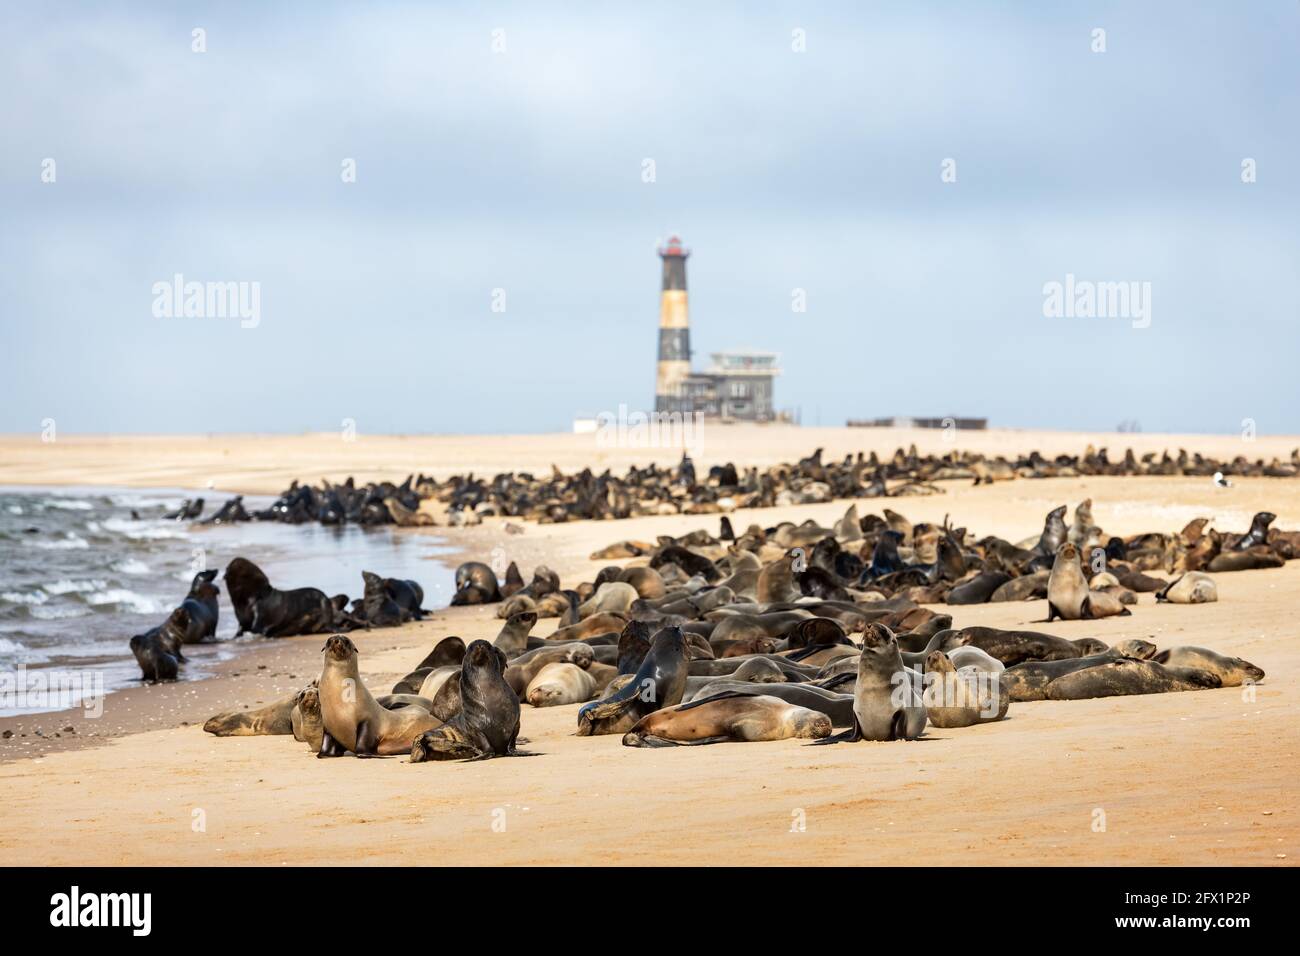 Fur seal colony enjoy the heat of the sun at the Walvis Bay near lighthouse at Sandwich Harbour, Swacopmund, Namibia, Africa. Wildlife photography Stock Photo